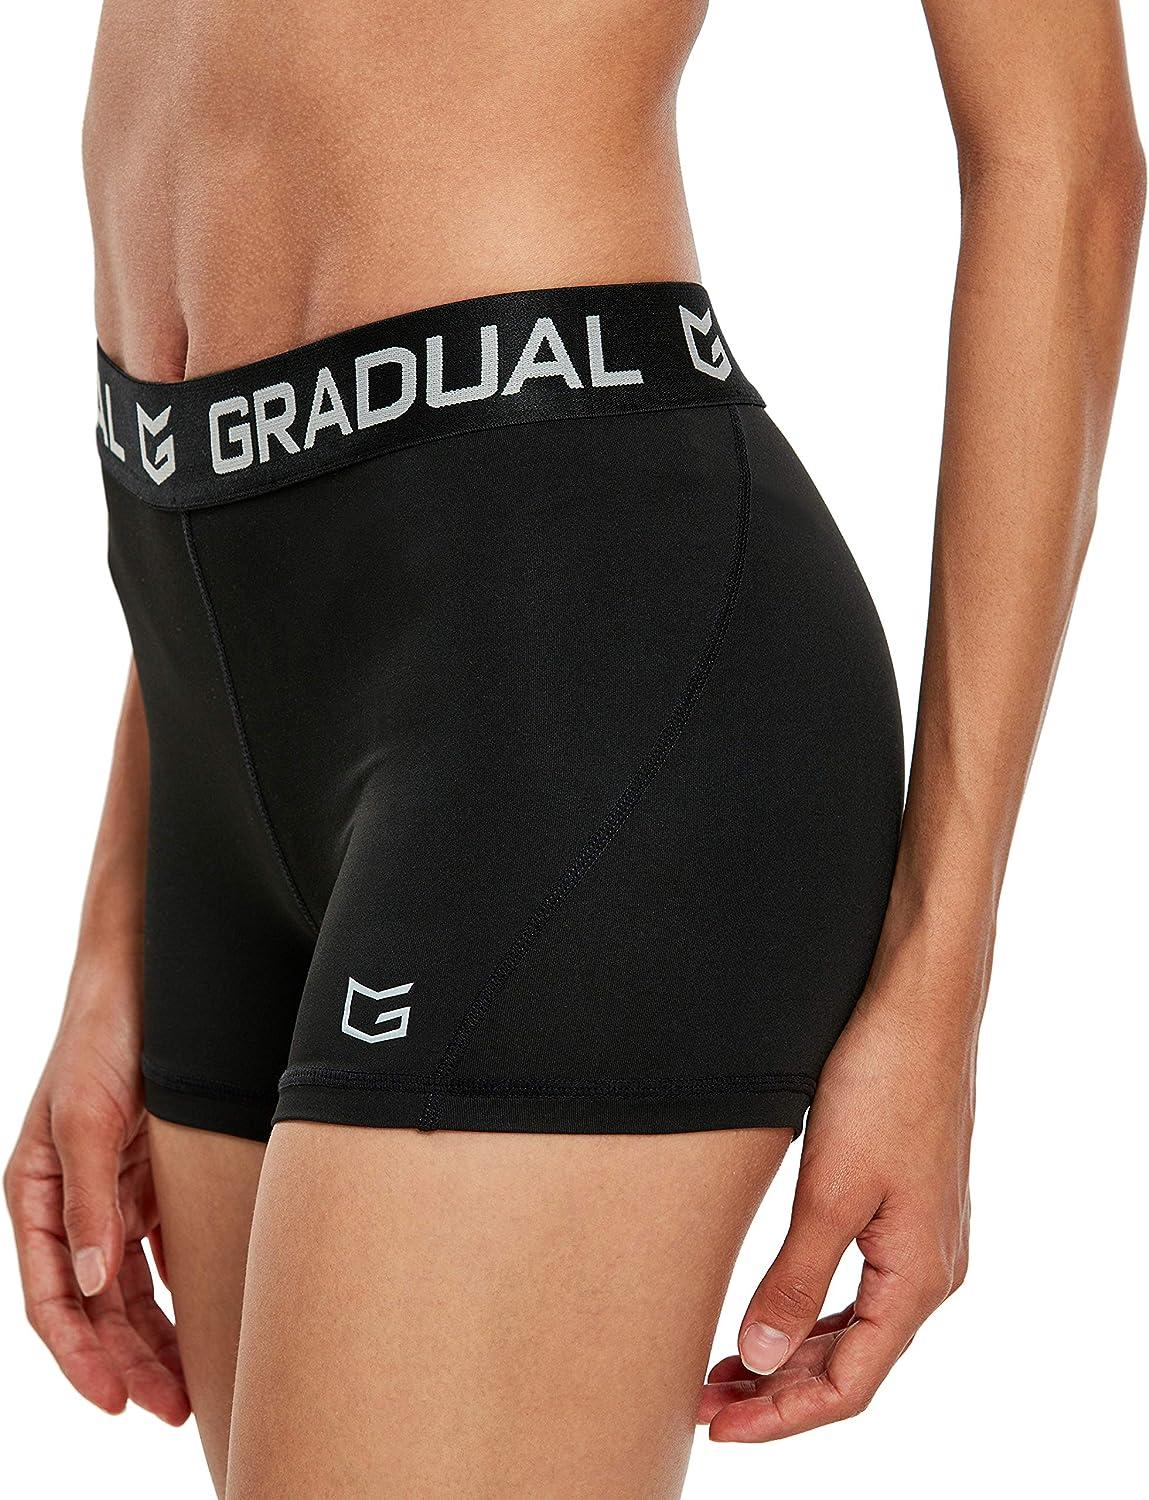 G Gradual Women's Spandex Compression Volleyball Shorts 3 /7 Workout Pro  Shorts for Women 3 Pack:black/Black/Black Small